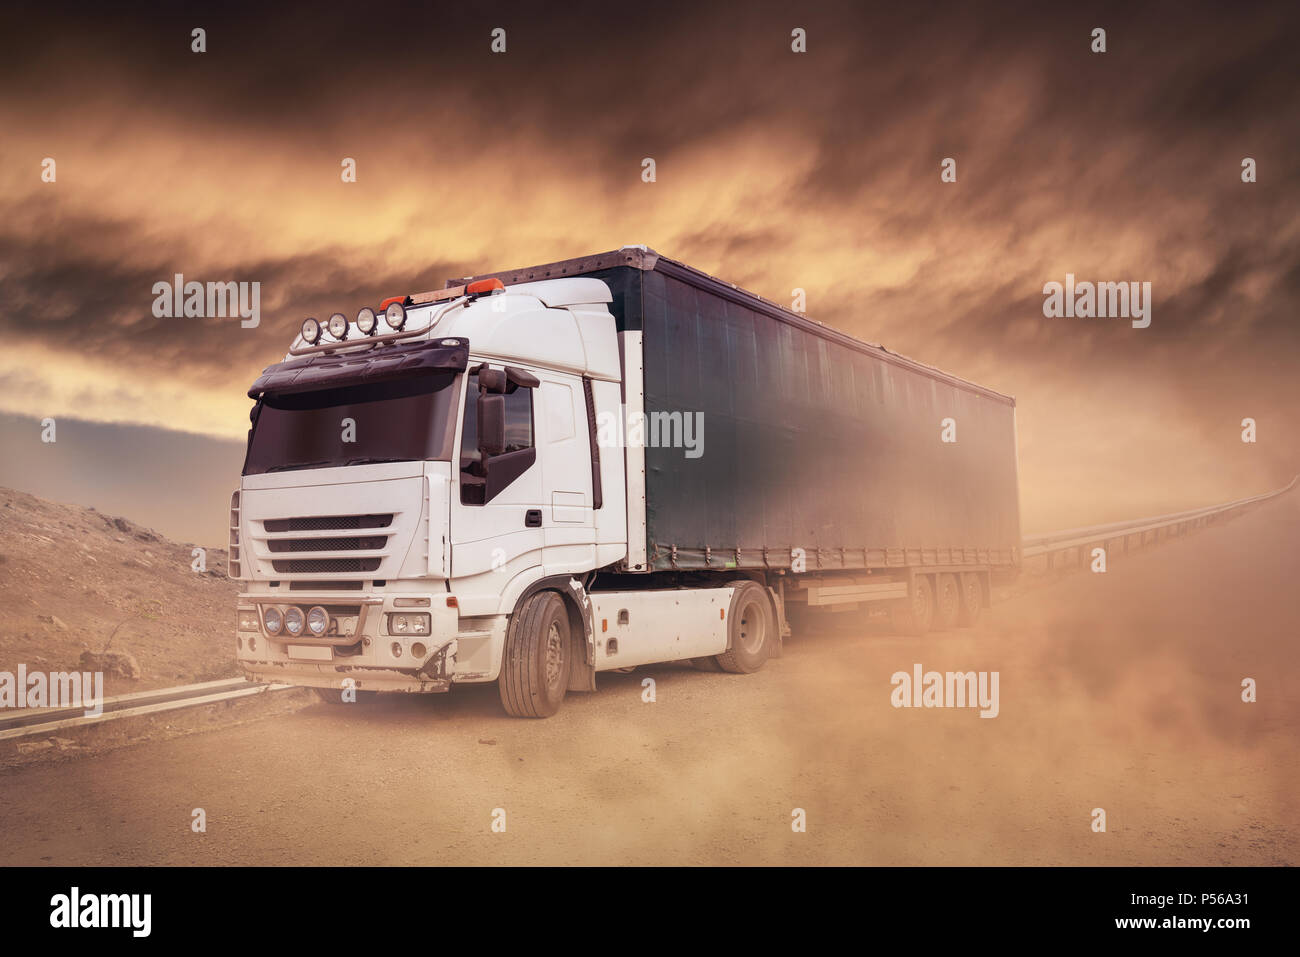 Shipping Truck on the highway- Trucking, Freight Transport. Stock Photo